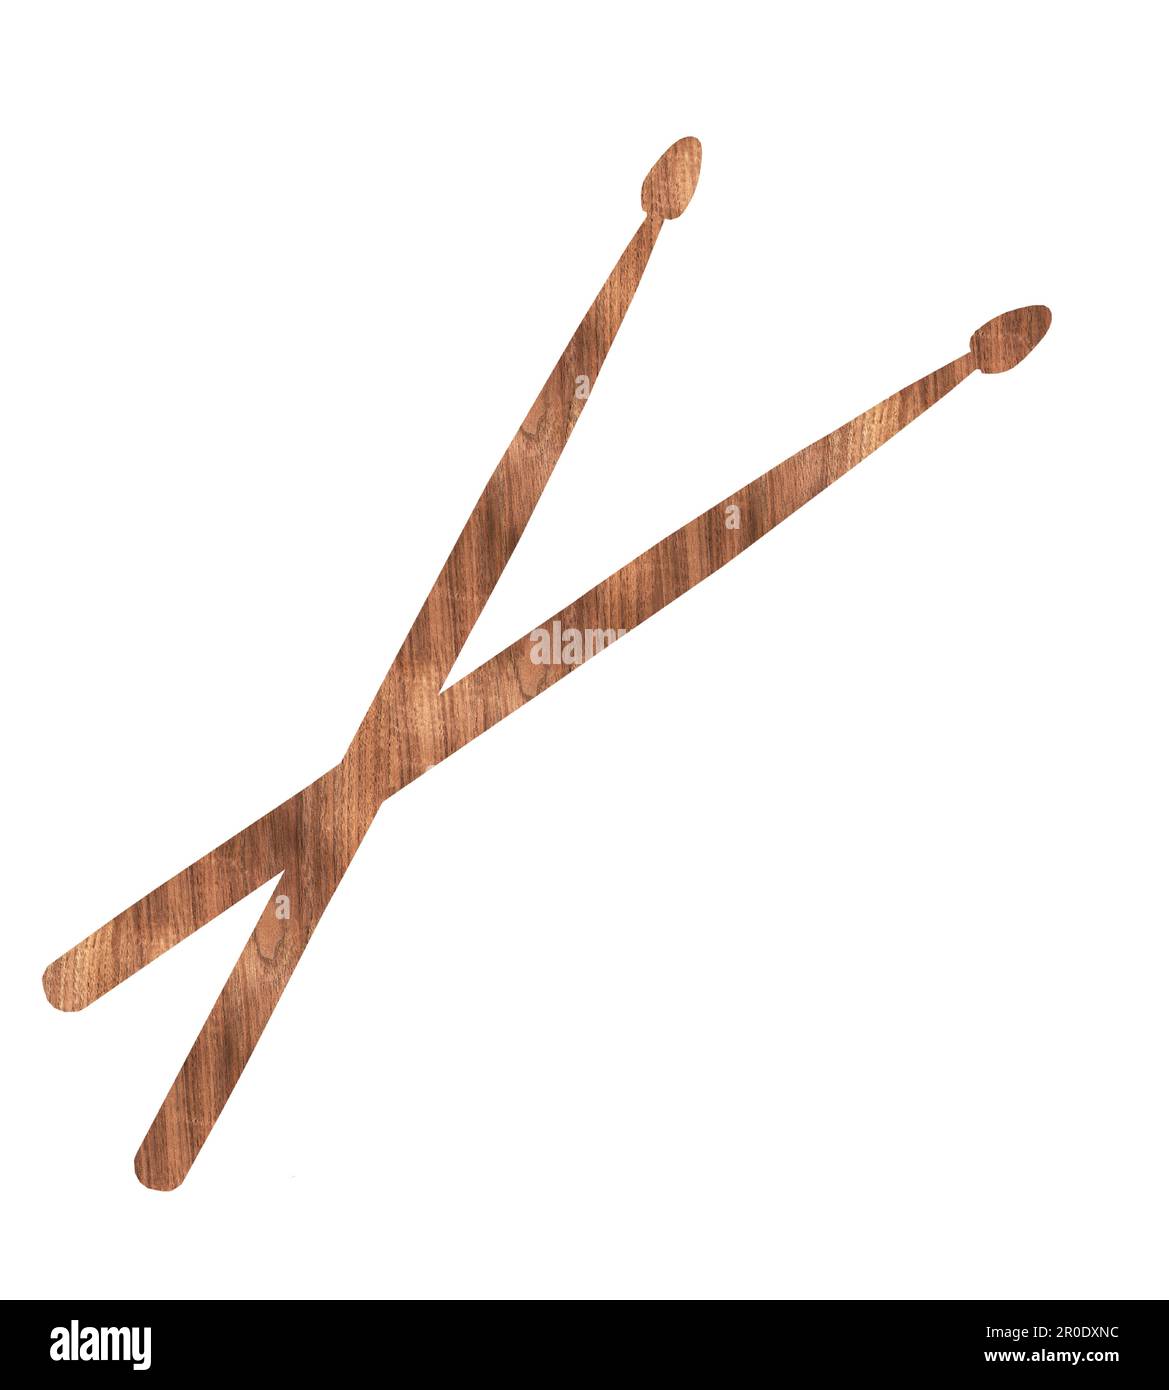 A Pair of Wooden Drumsticks Stock Vector